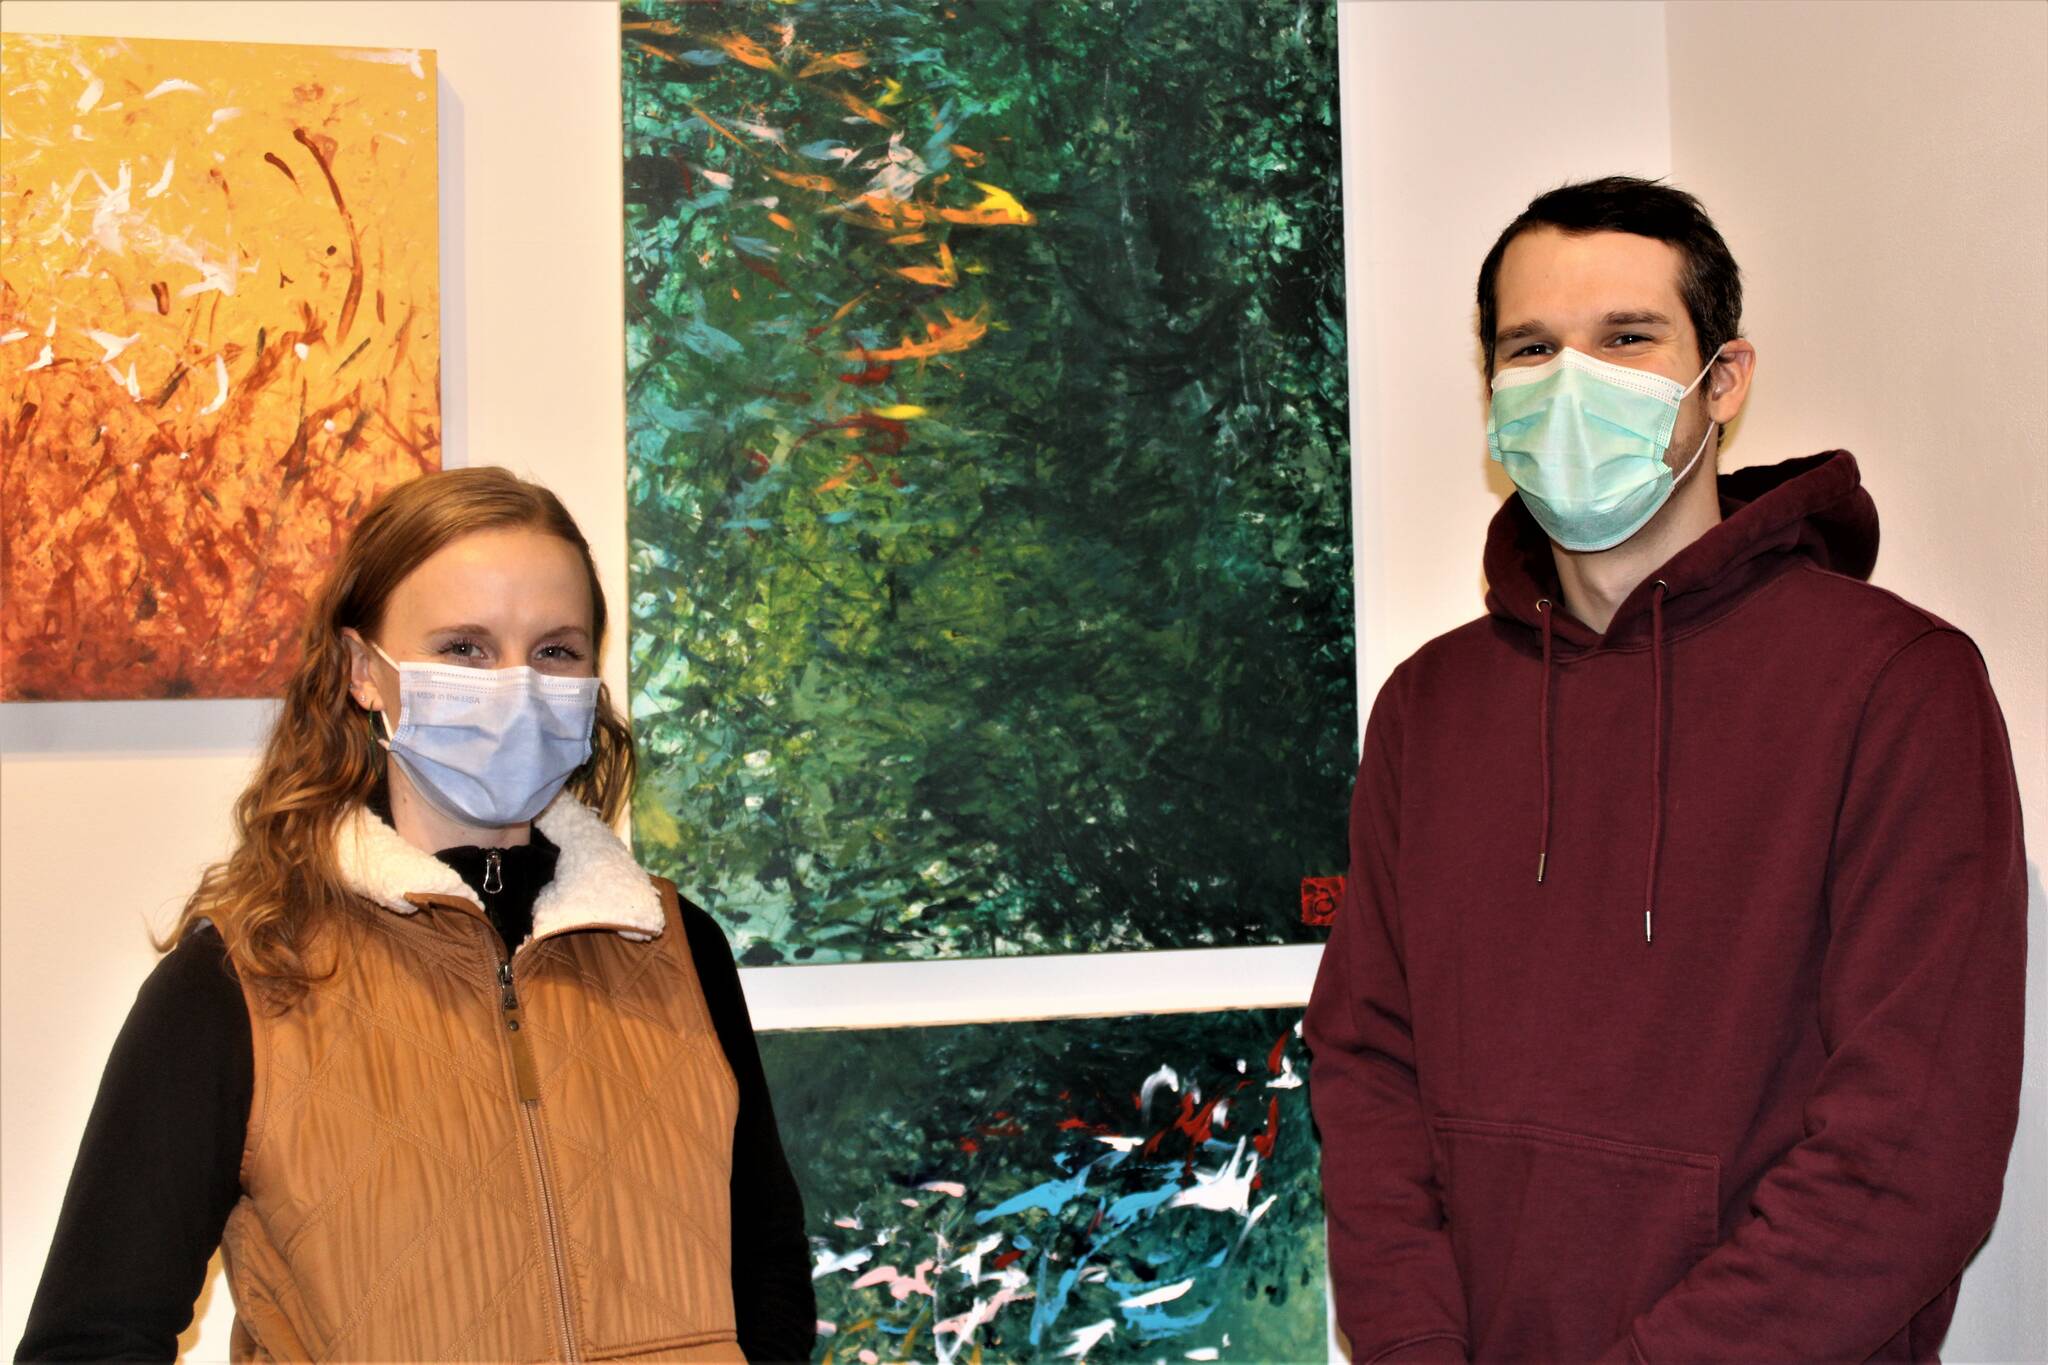 Siblings Lea Skaggs, left, and Drake Skaggs, right, show off work by their brother Avery Skaggs at the opening night of a show at the Juneau-Douglas City Museum featuring a selection of work Avery Skaggs created during the pandemic lockdown. The exhibition is titled “Home: Disability Creativity in a Pandemic Lockdown.” (Dana Zigmund / Juneau Empire)